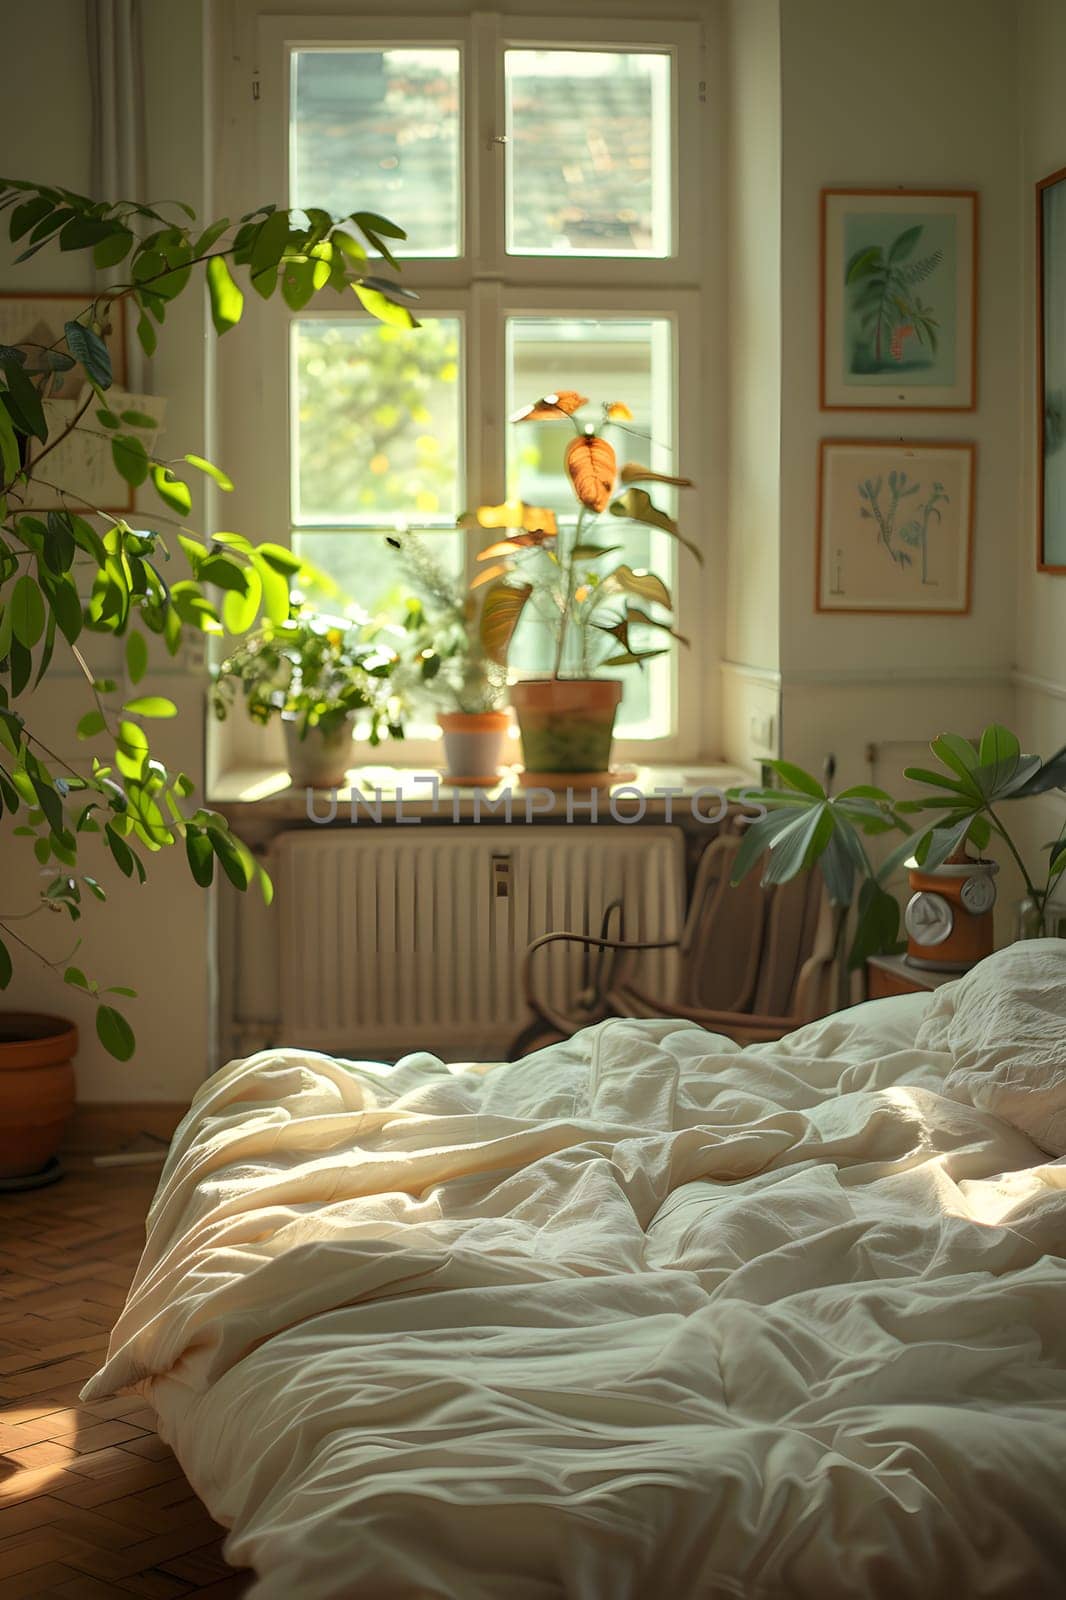 A bedroom with a cozy bed, potted plants, and a window overlooking the building by Nadtochiy